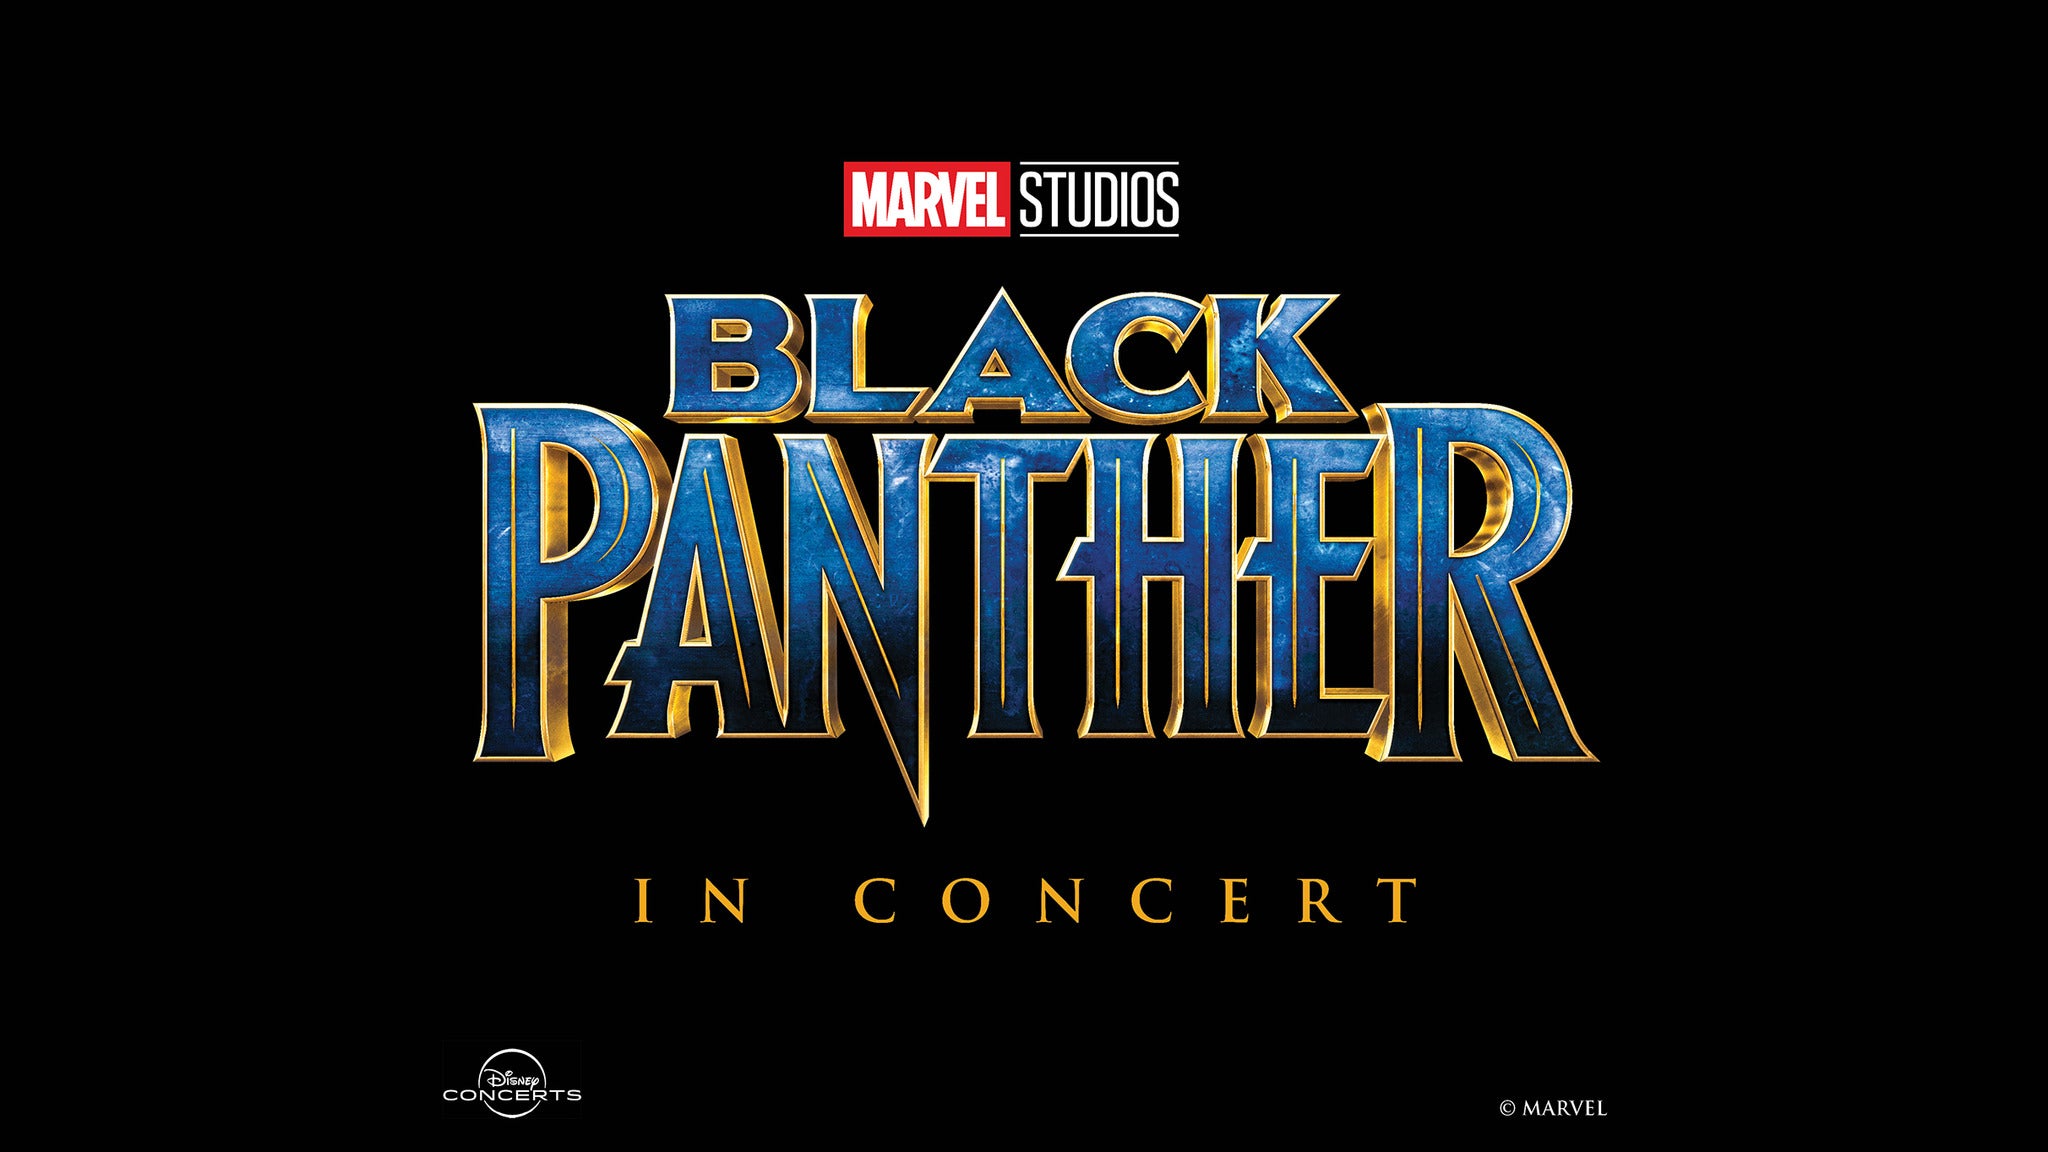 Marvel Studios' Black Panther in Concert - Chicago Philharmonic in Chicago promo photo for MSG presale offer code